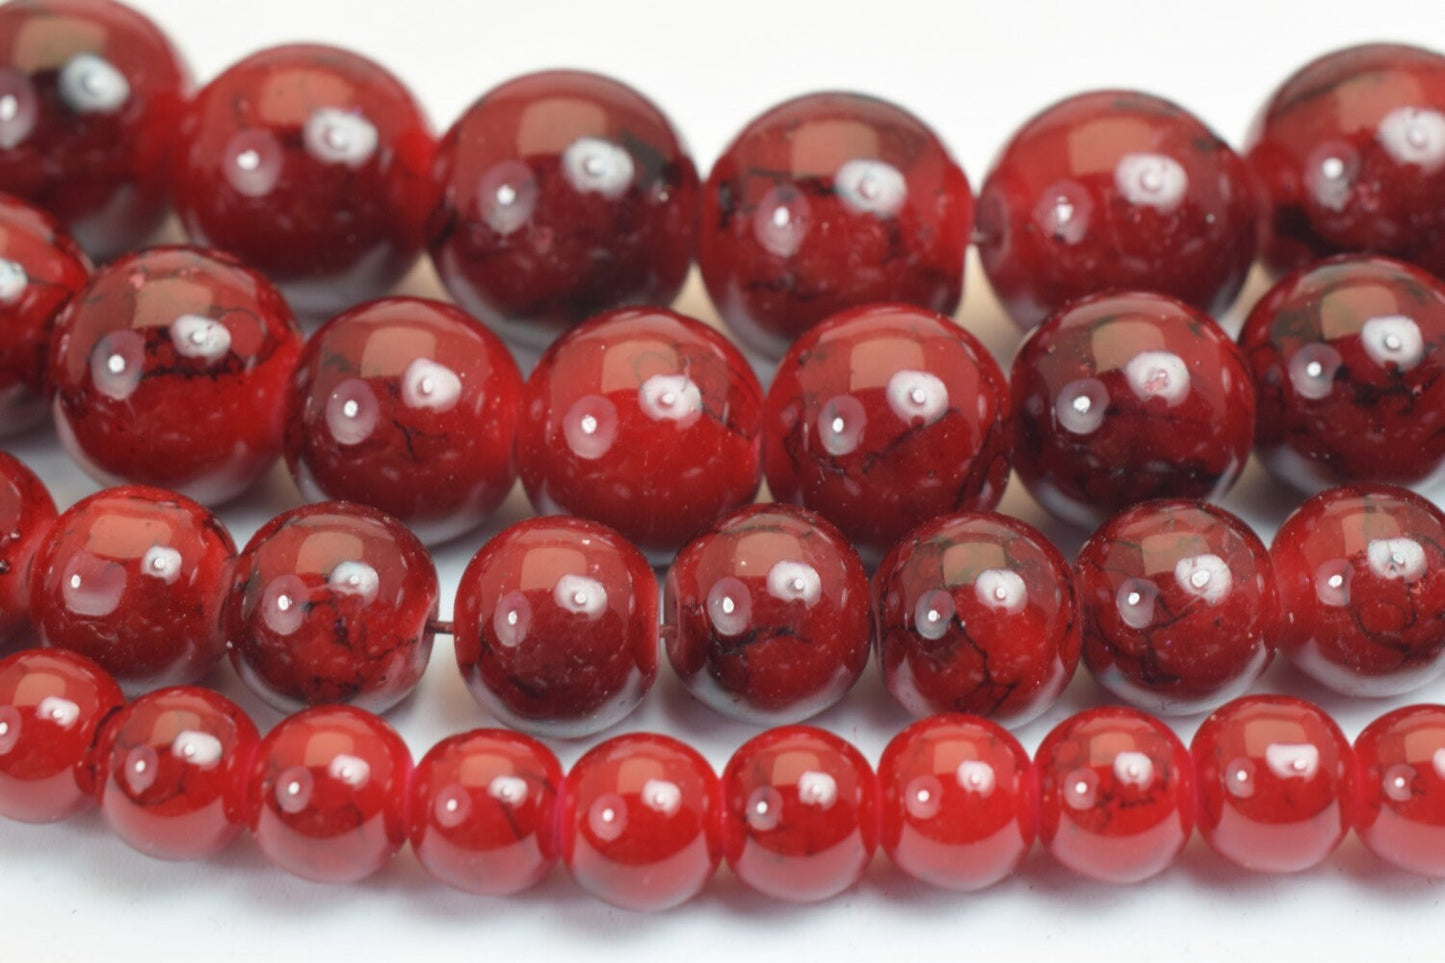 Glass Beads Round Beads Two Tone Red And Black 6mm/8mm/10mm/12mm Shine Round Beads For Jewelry Making Item# TTAD